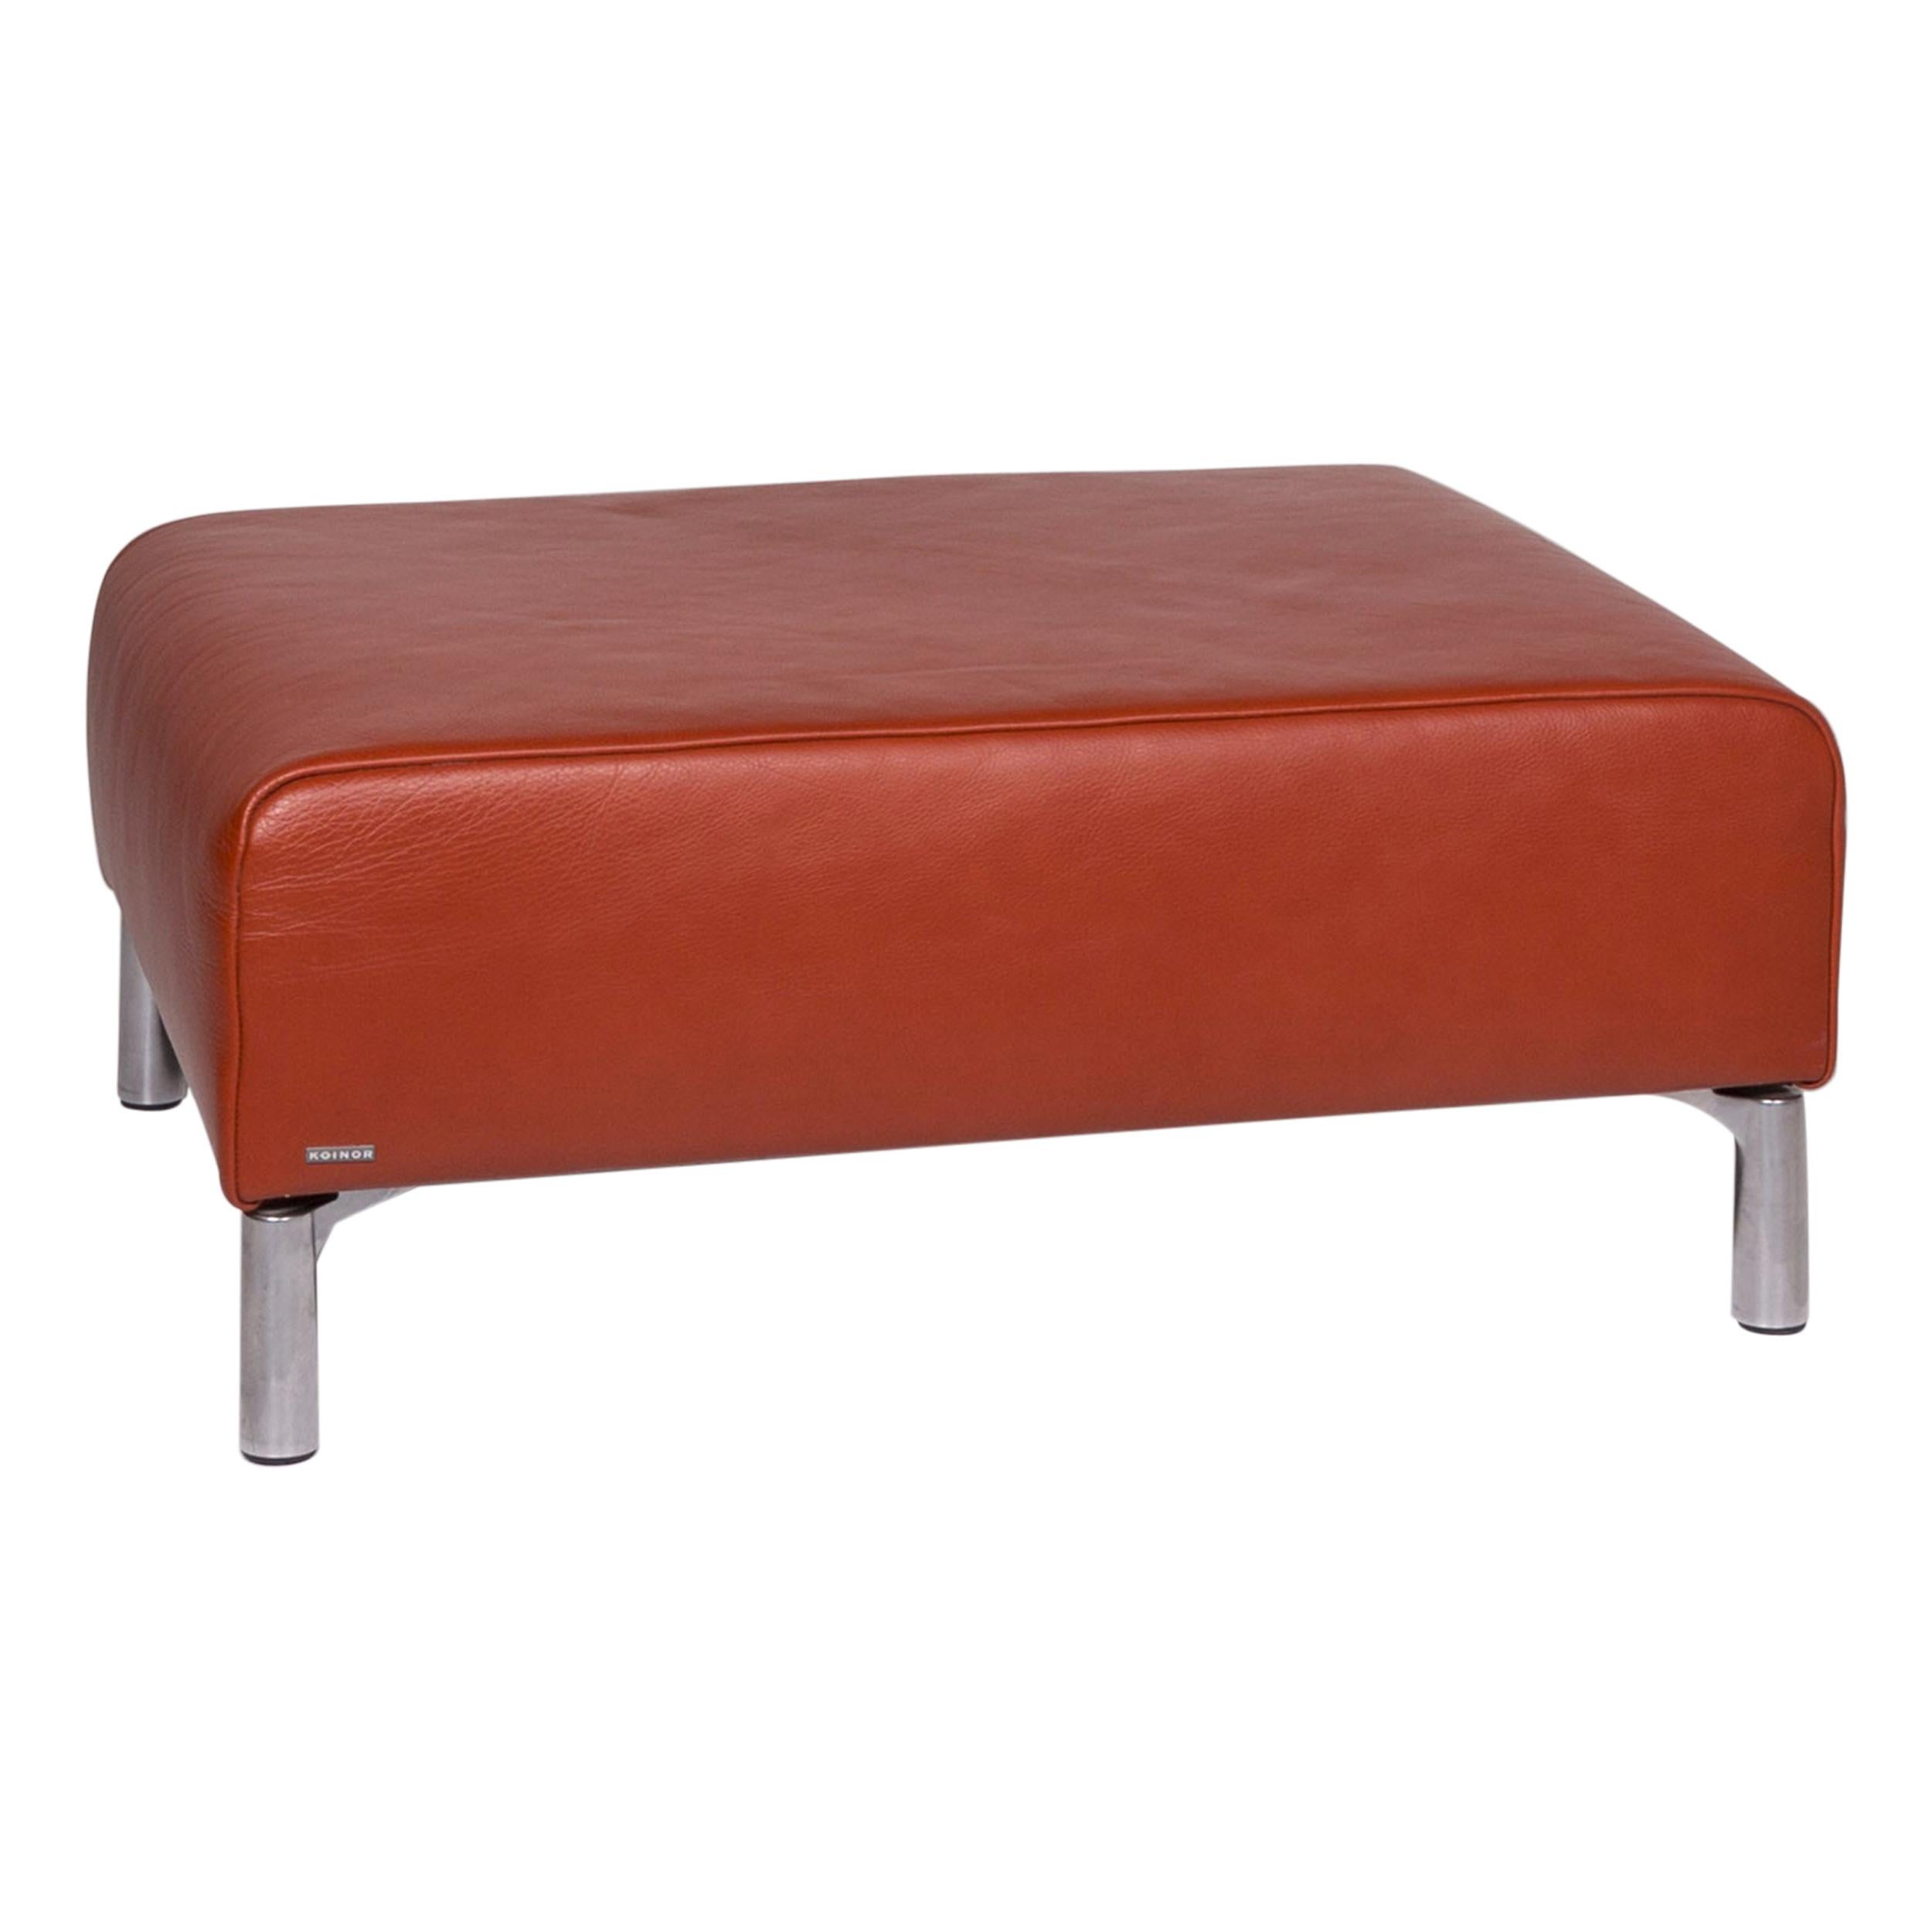 Koinor Leather Stool Brown Stool Ottoman For Sale